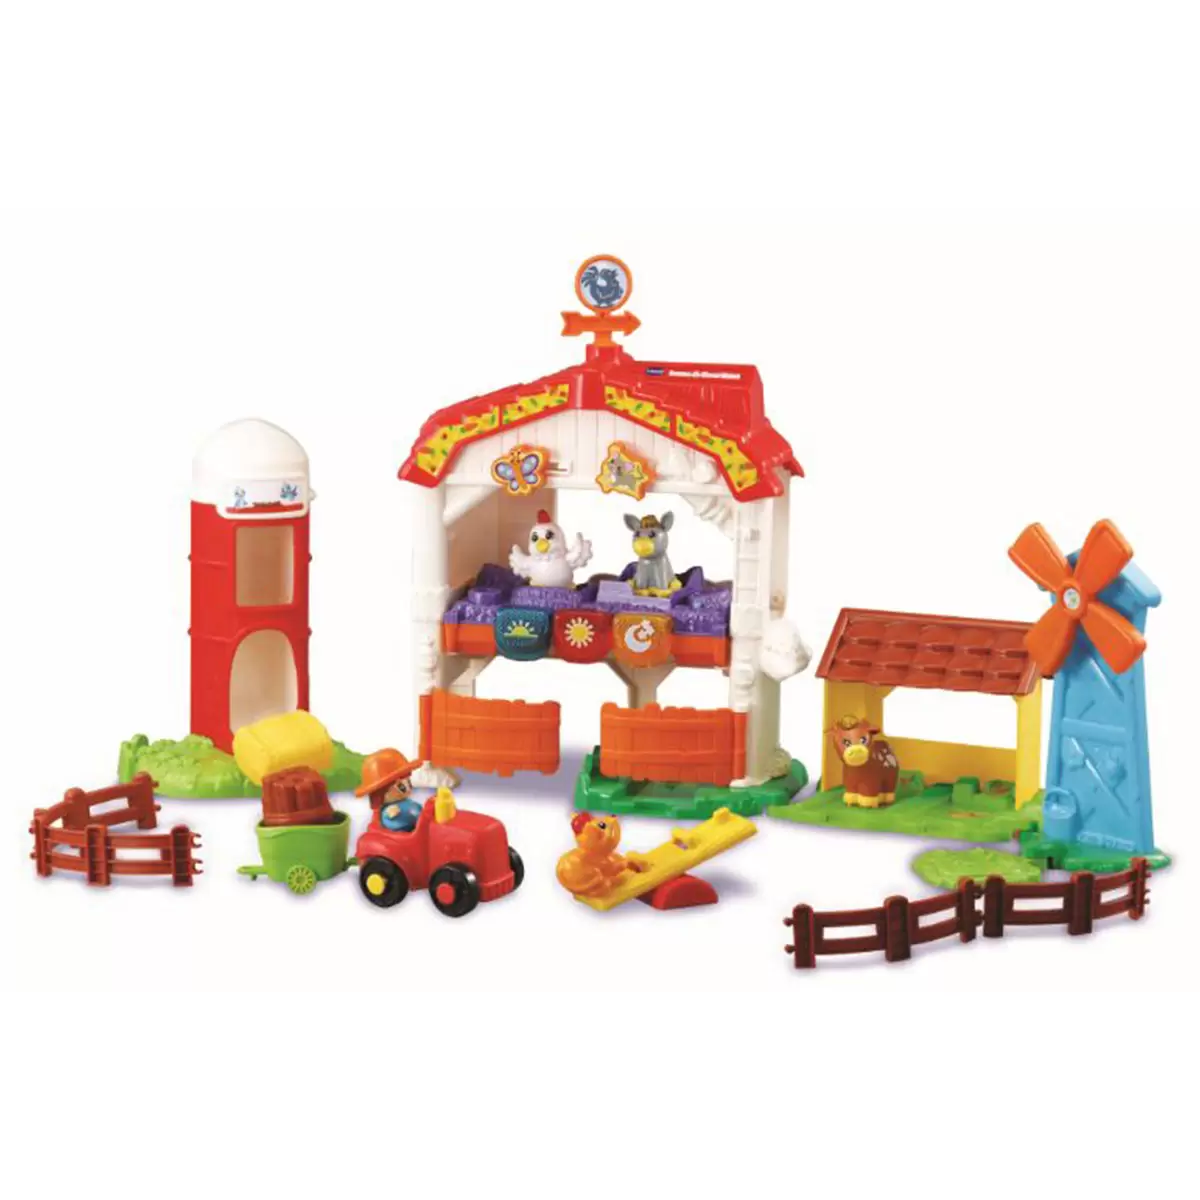 Buy VTech Learn & Grow Farm Overview Image at Costco.co.uk